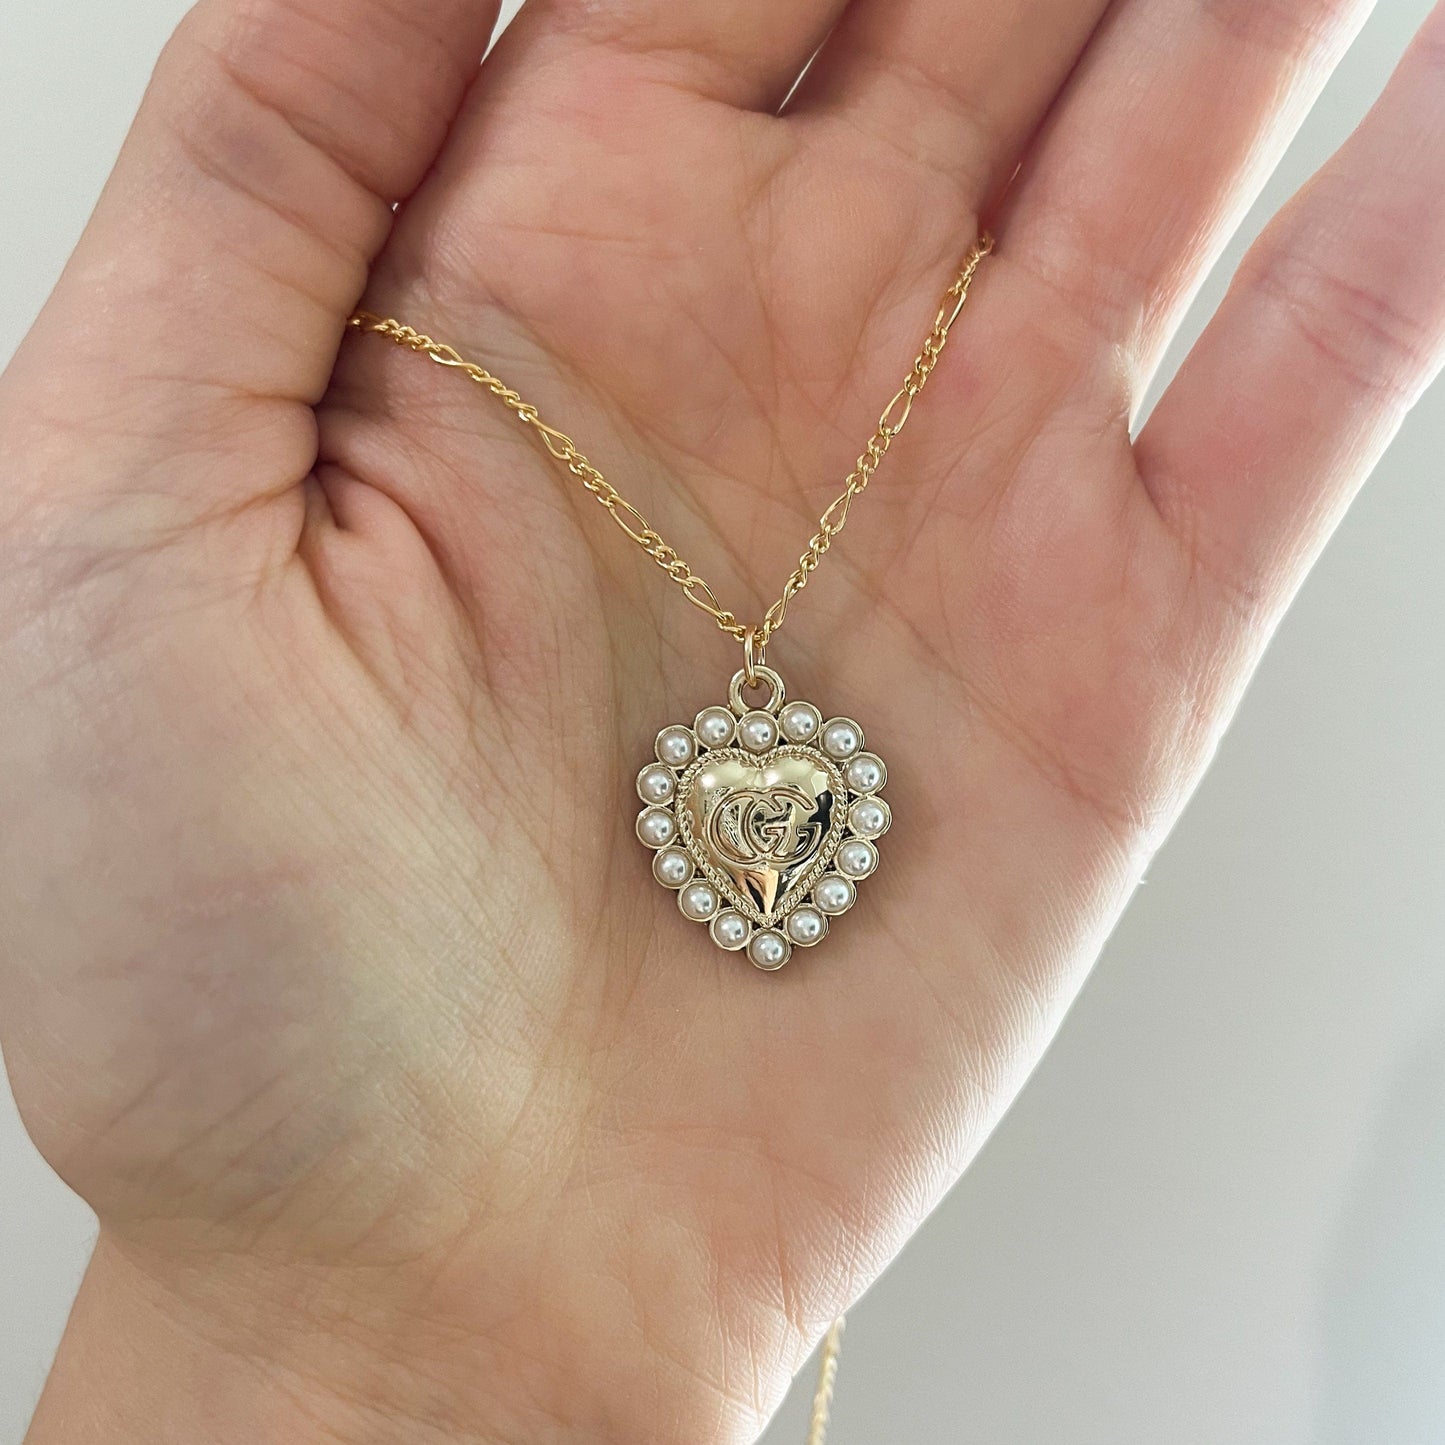 Vintage GG Heart Necklace